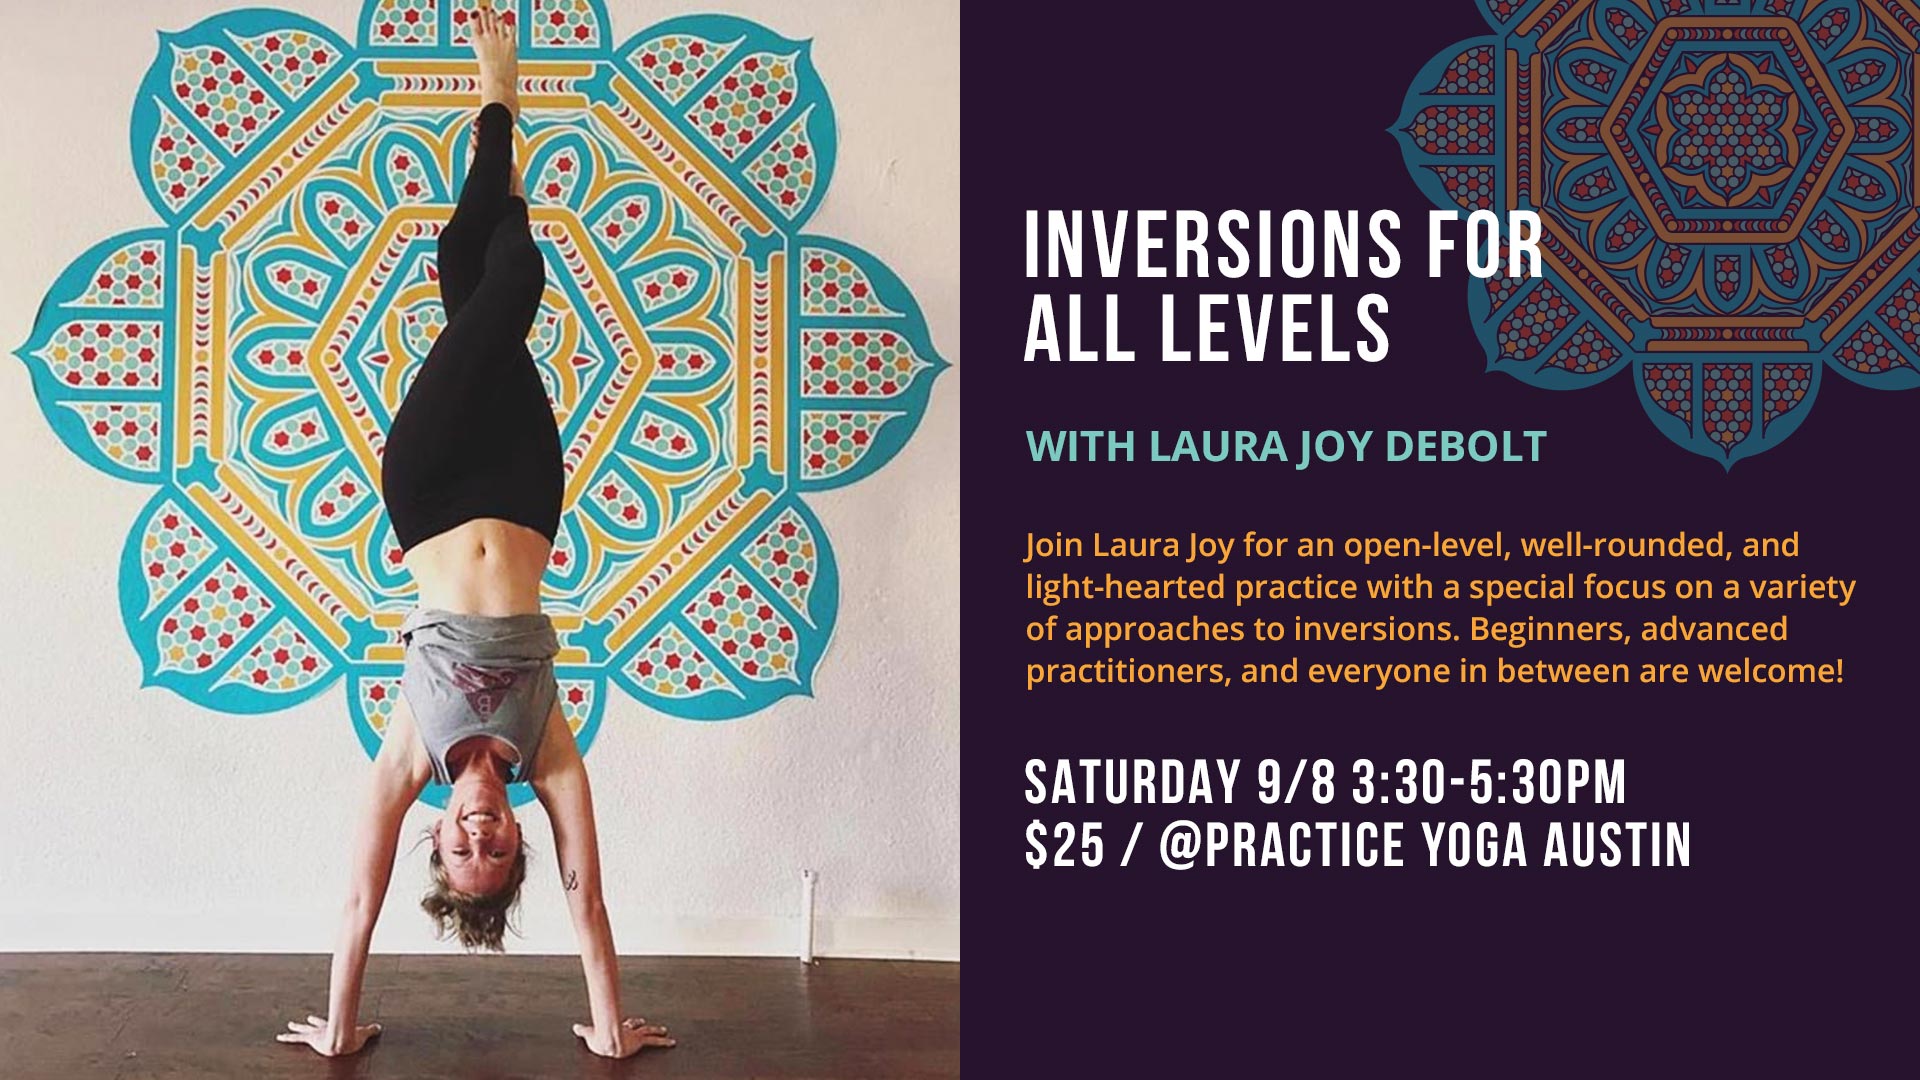 Inversions for All Levels with Practice Yoga Austin